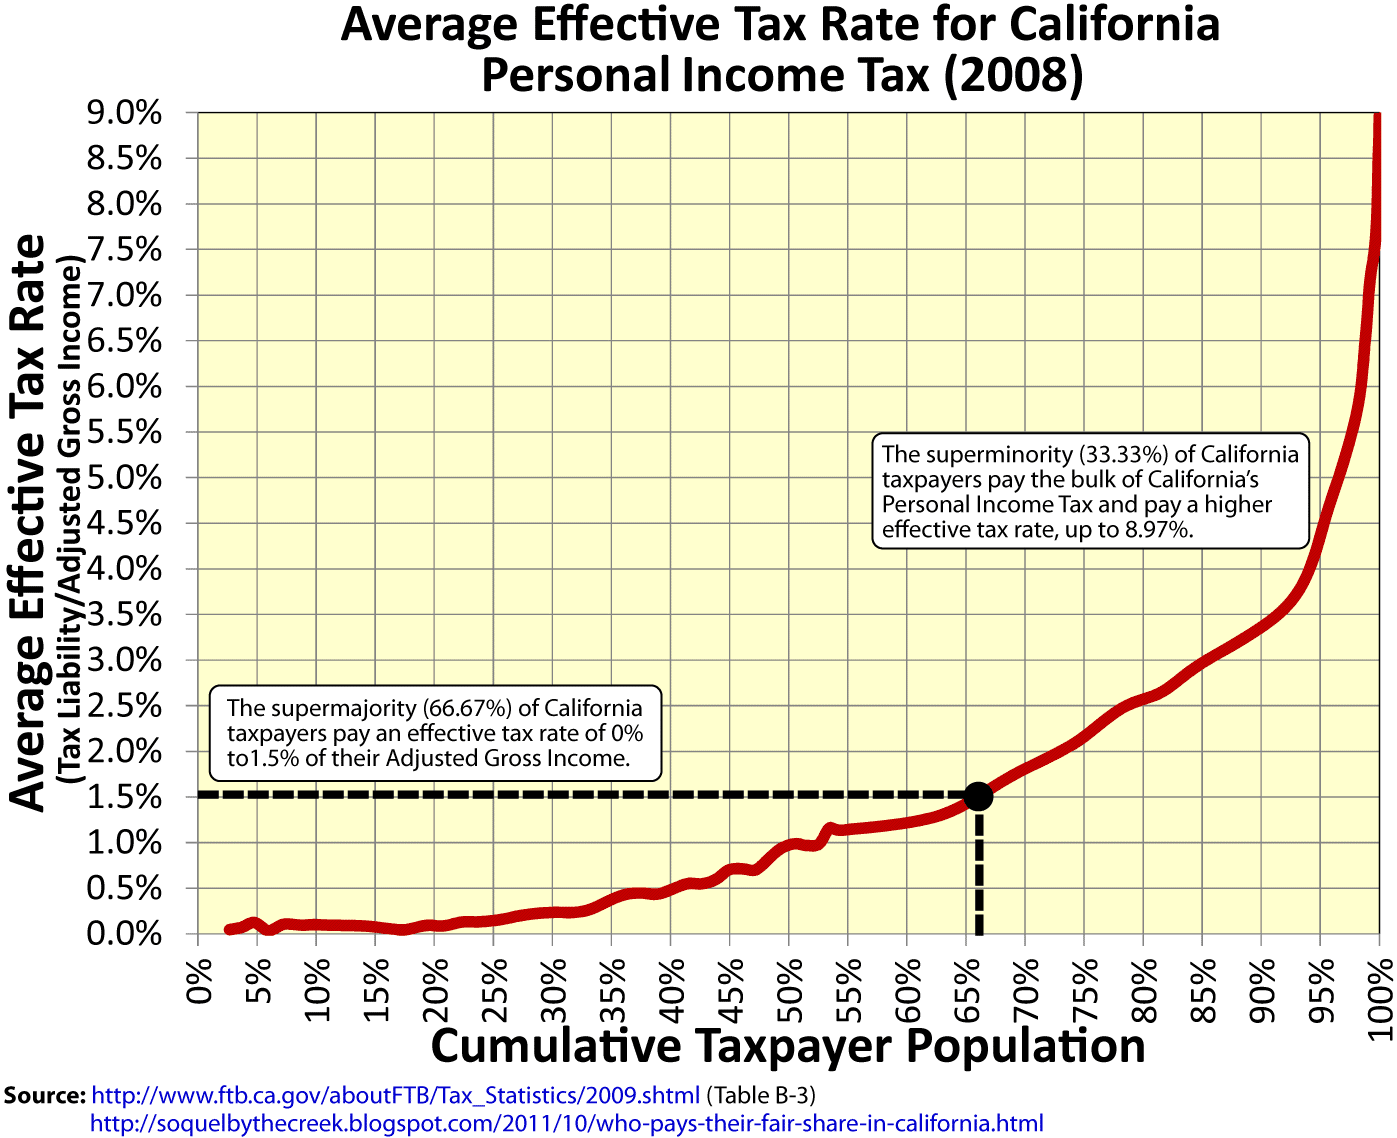 Average+Effective+Tax+Rate+California+Personal+Income+Tax+2008.png